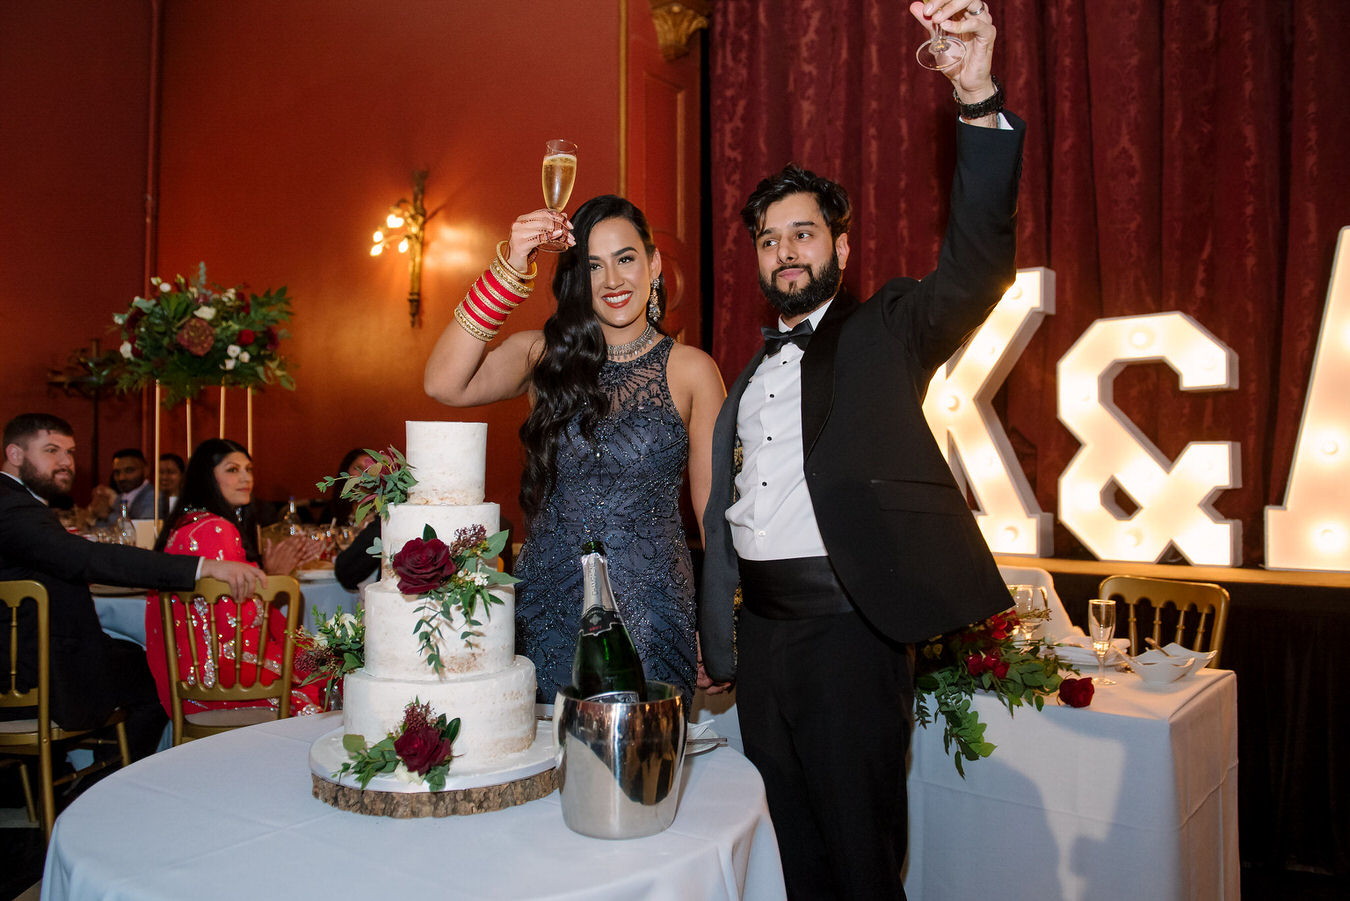 Bride and groom are lifting the glasses up cheering after cutting their wedding cake.